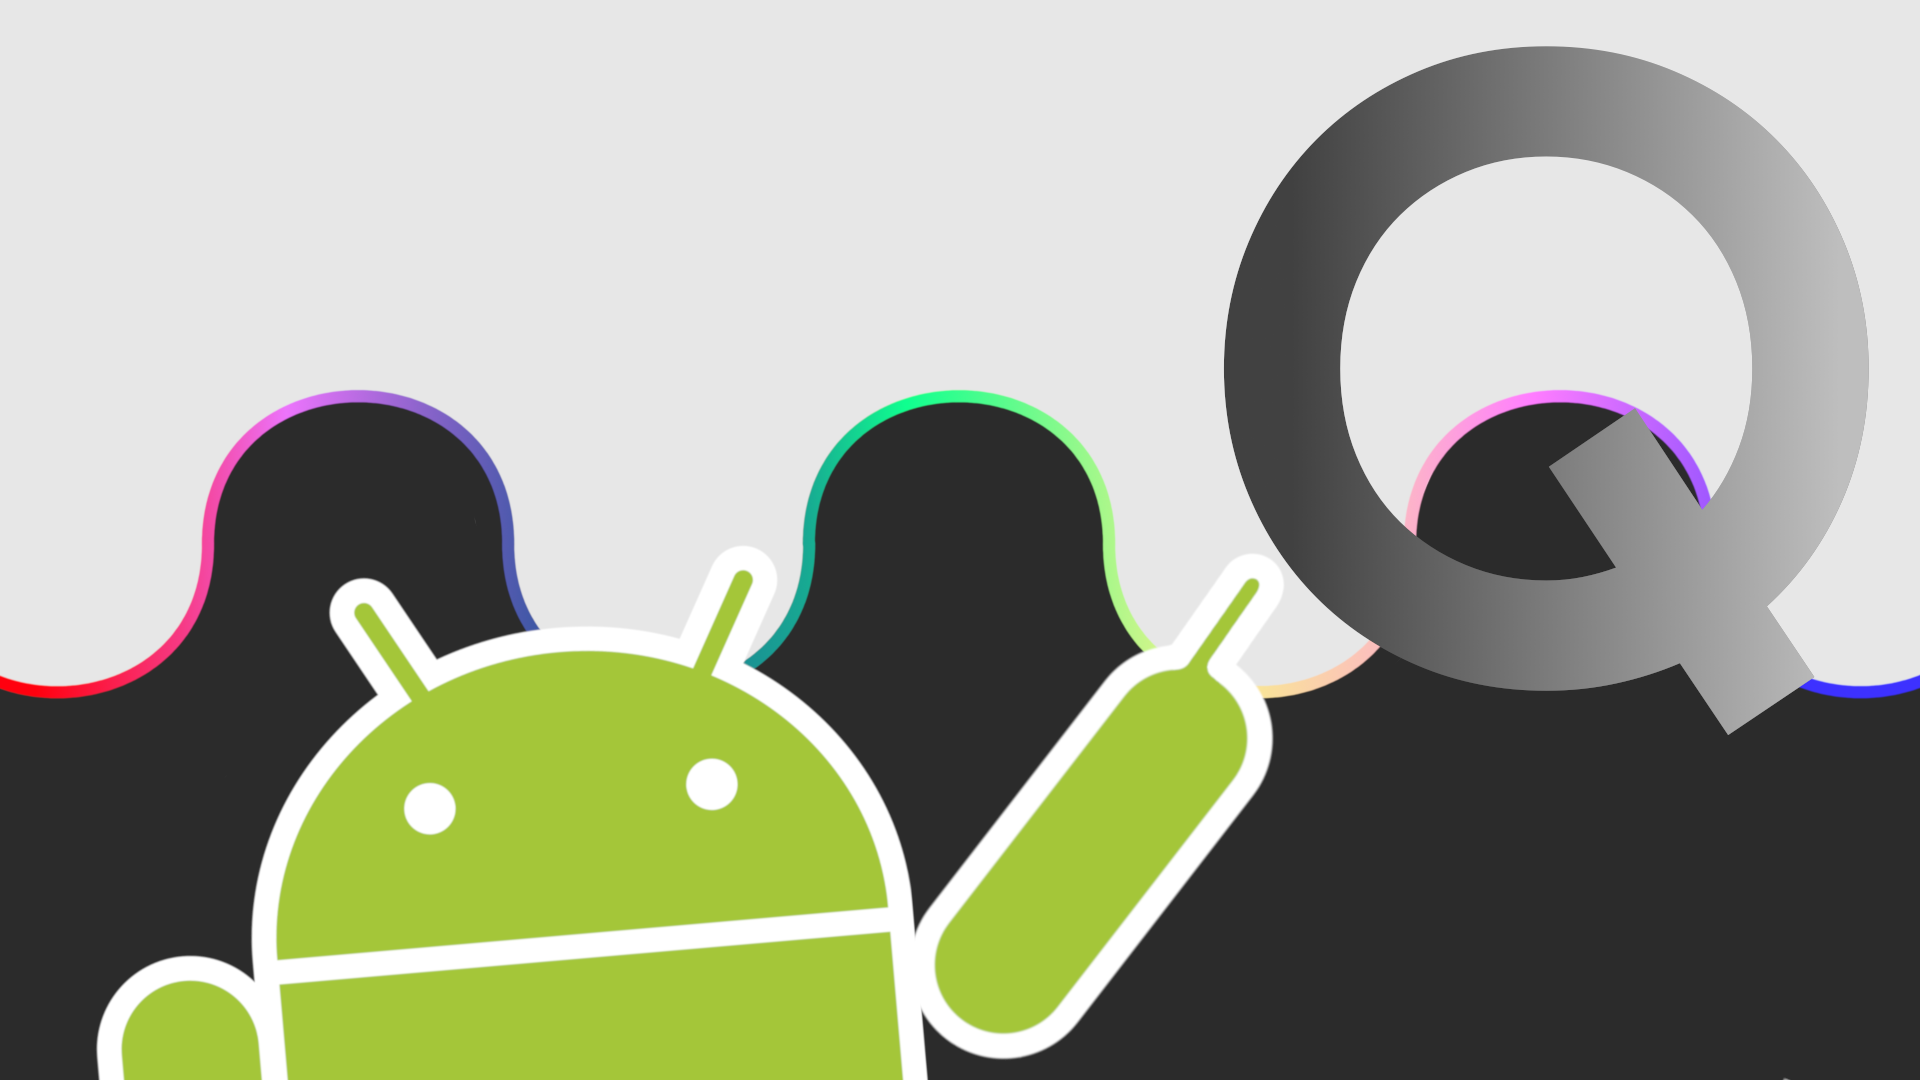 [Update: Maybe on Wednesday] The Android Q Beta is likely launching in just a few hours